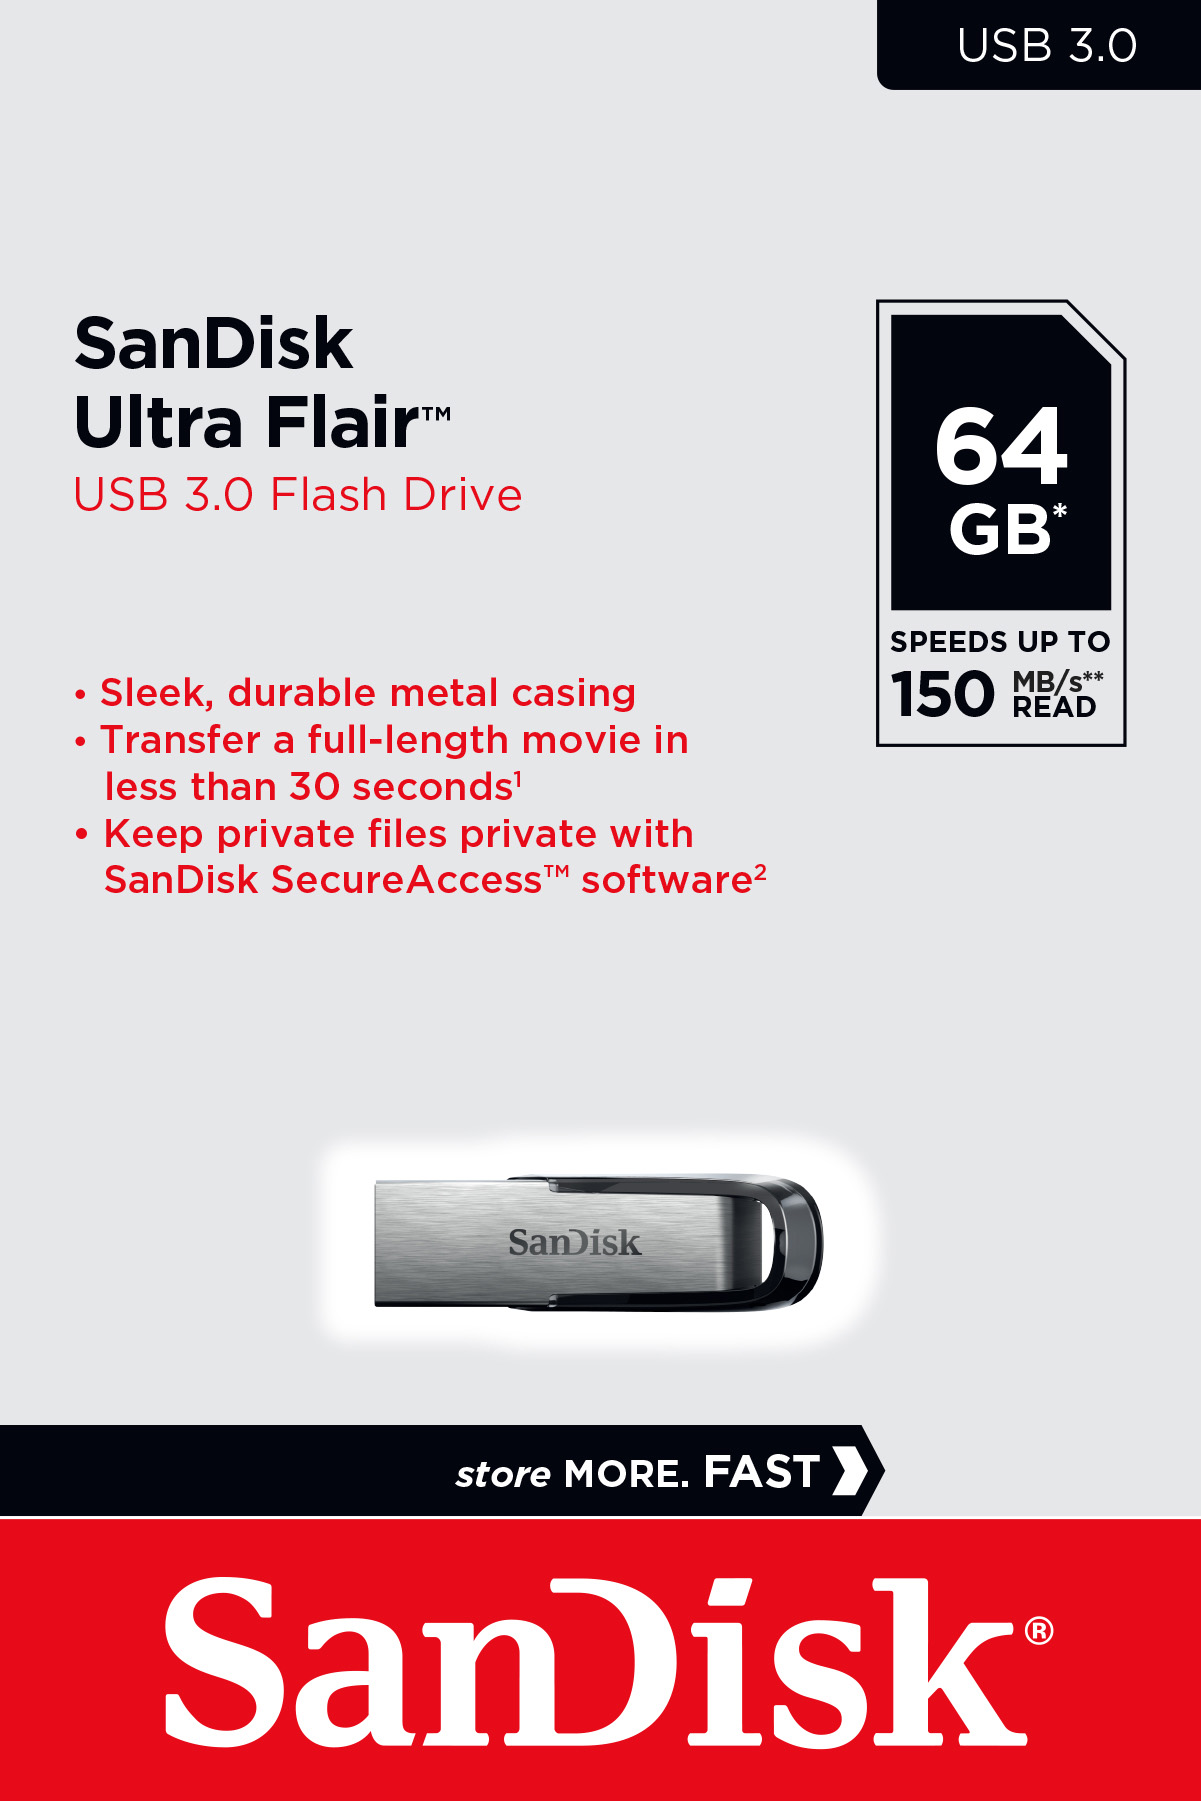 Sandisk USB 3.0 Stick 64GB, Ultra Flair Typ-A, (R) 150MB/s, SecureAccess, Retail-Blister